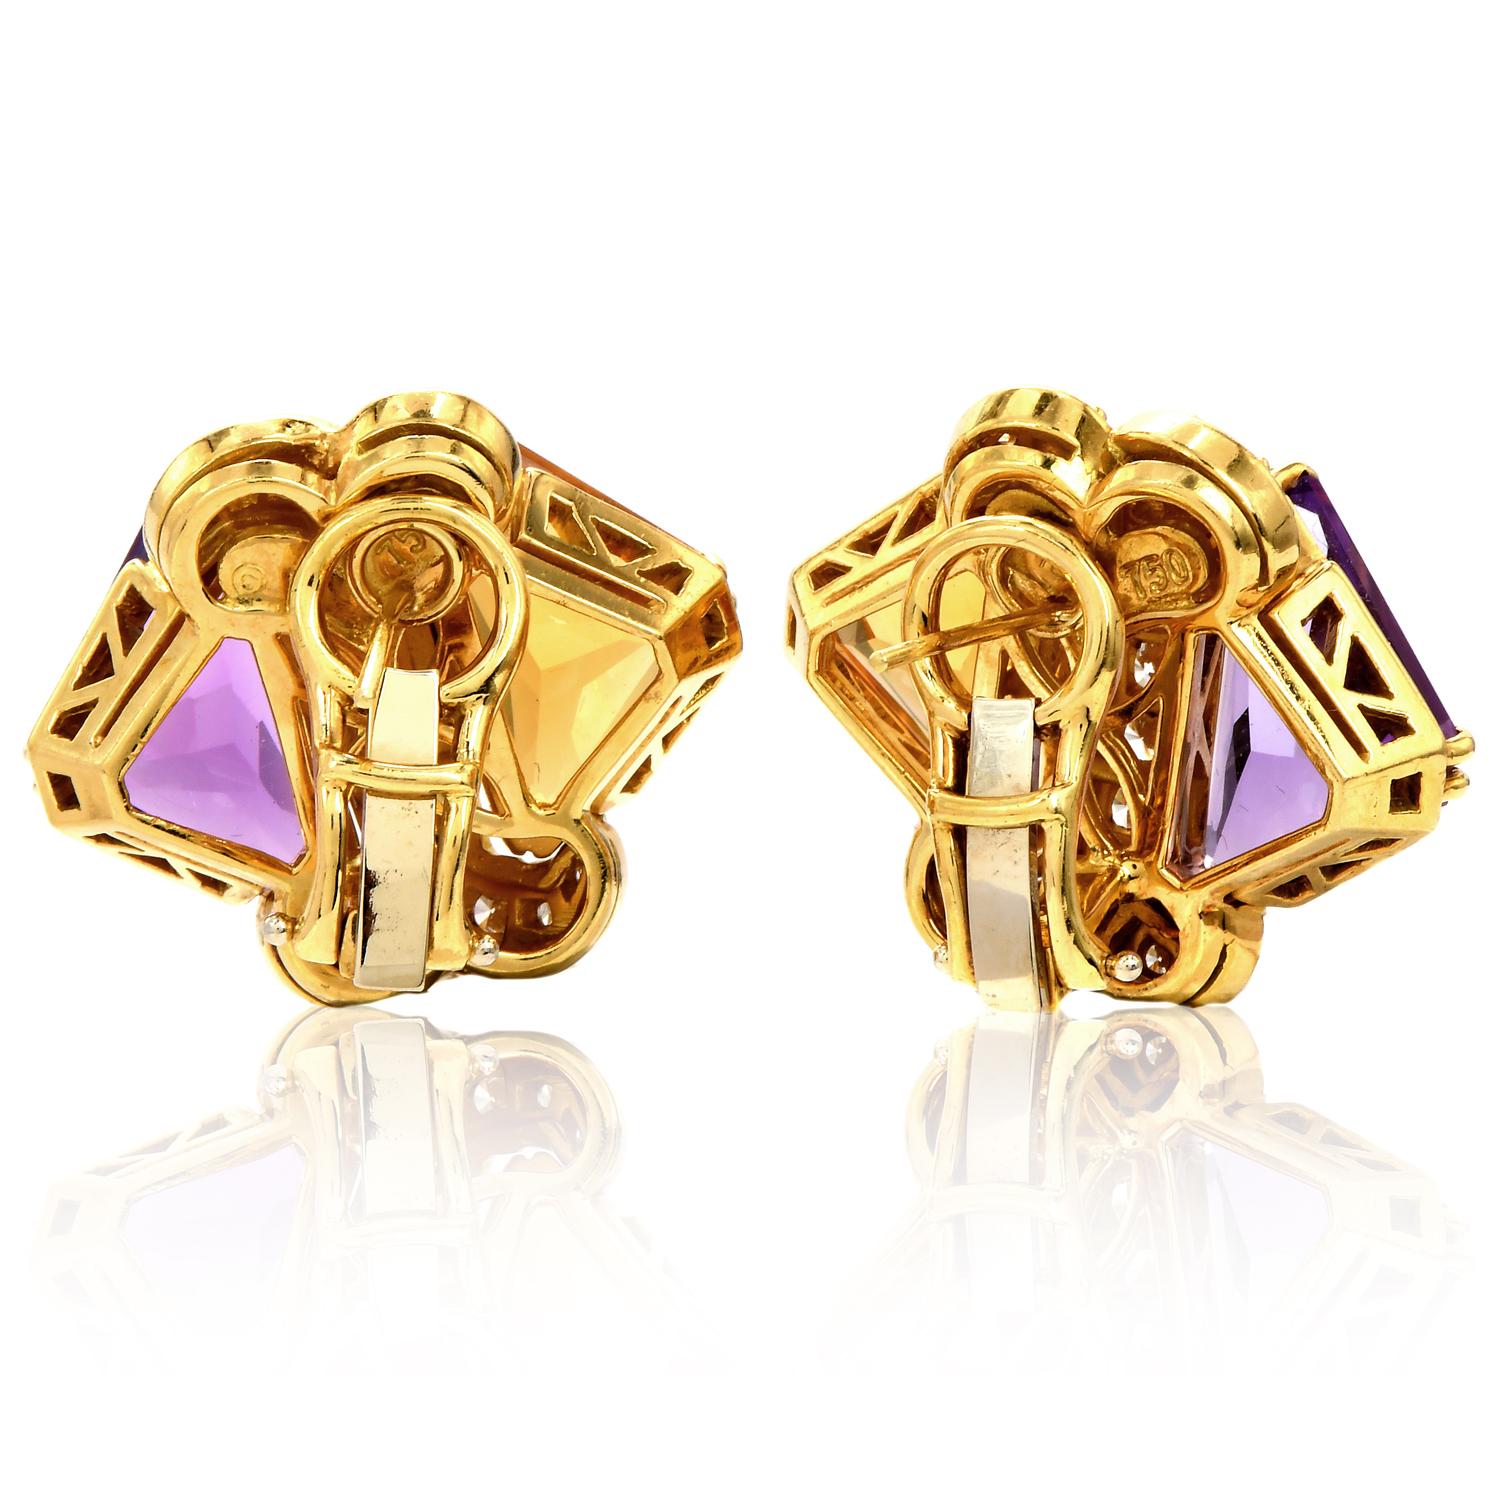 Hammerman Brothers Diamond Citrine Amethyst Gold Crossover Clip-On Earrings In Excellent Condition For Sale In Miami, FL